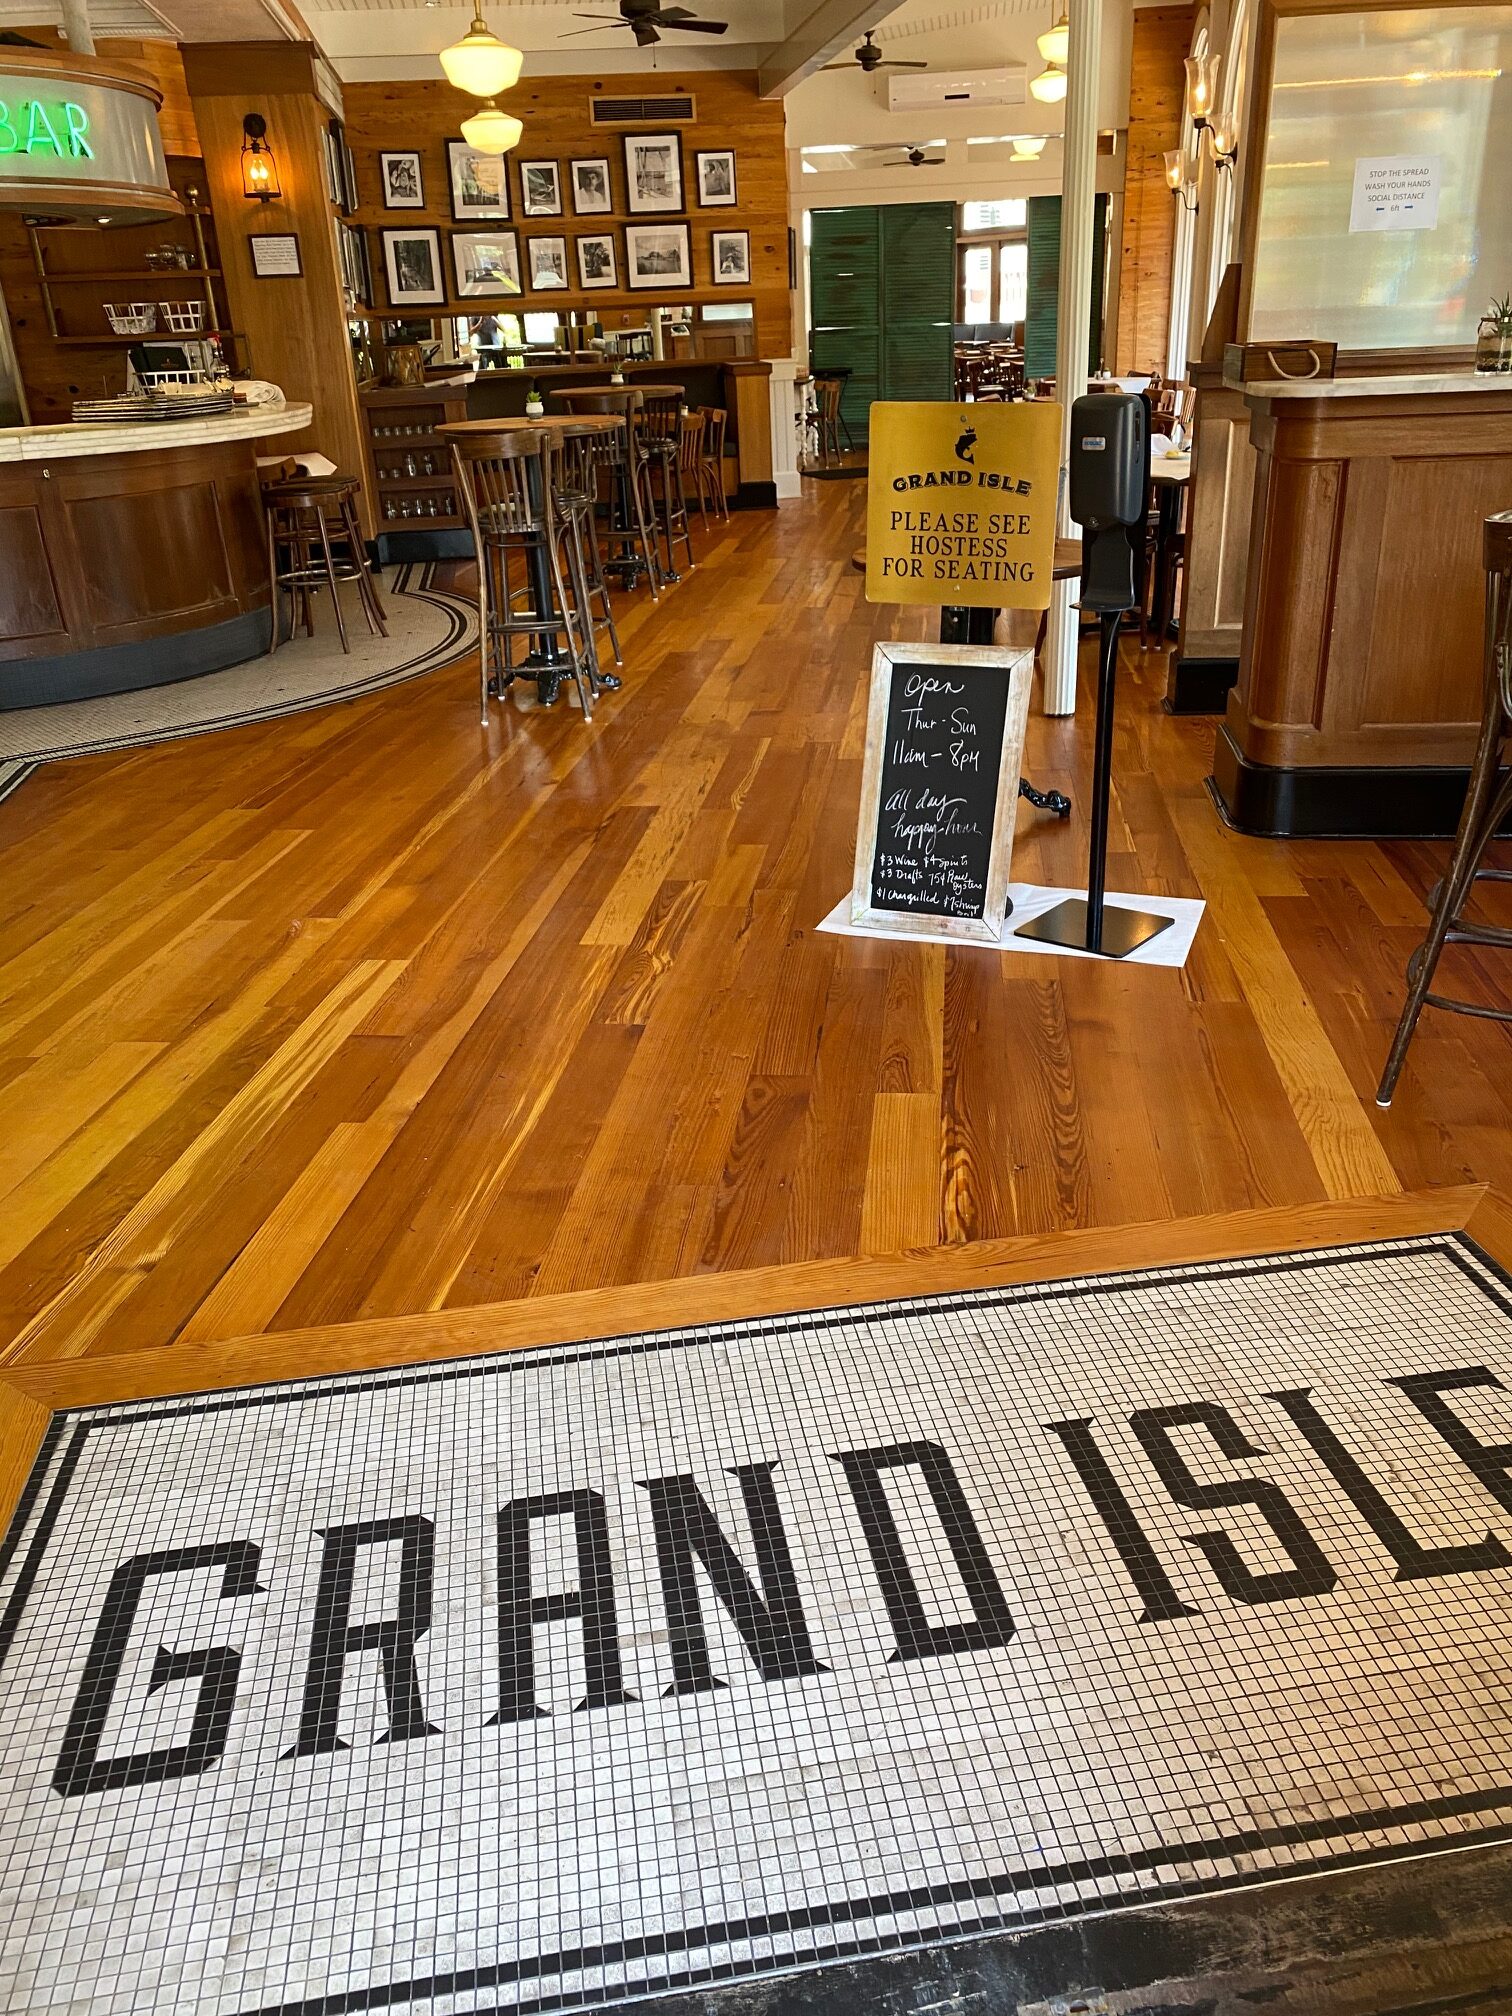 Photo of refinished antique heart of pine floors in a restaurant. Entrance with tiny small tiles reading Grand Isle surrounded by newly finished wooden floors.